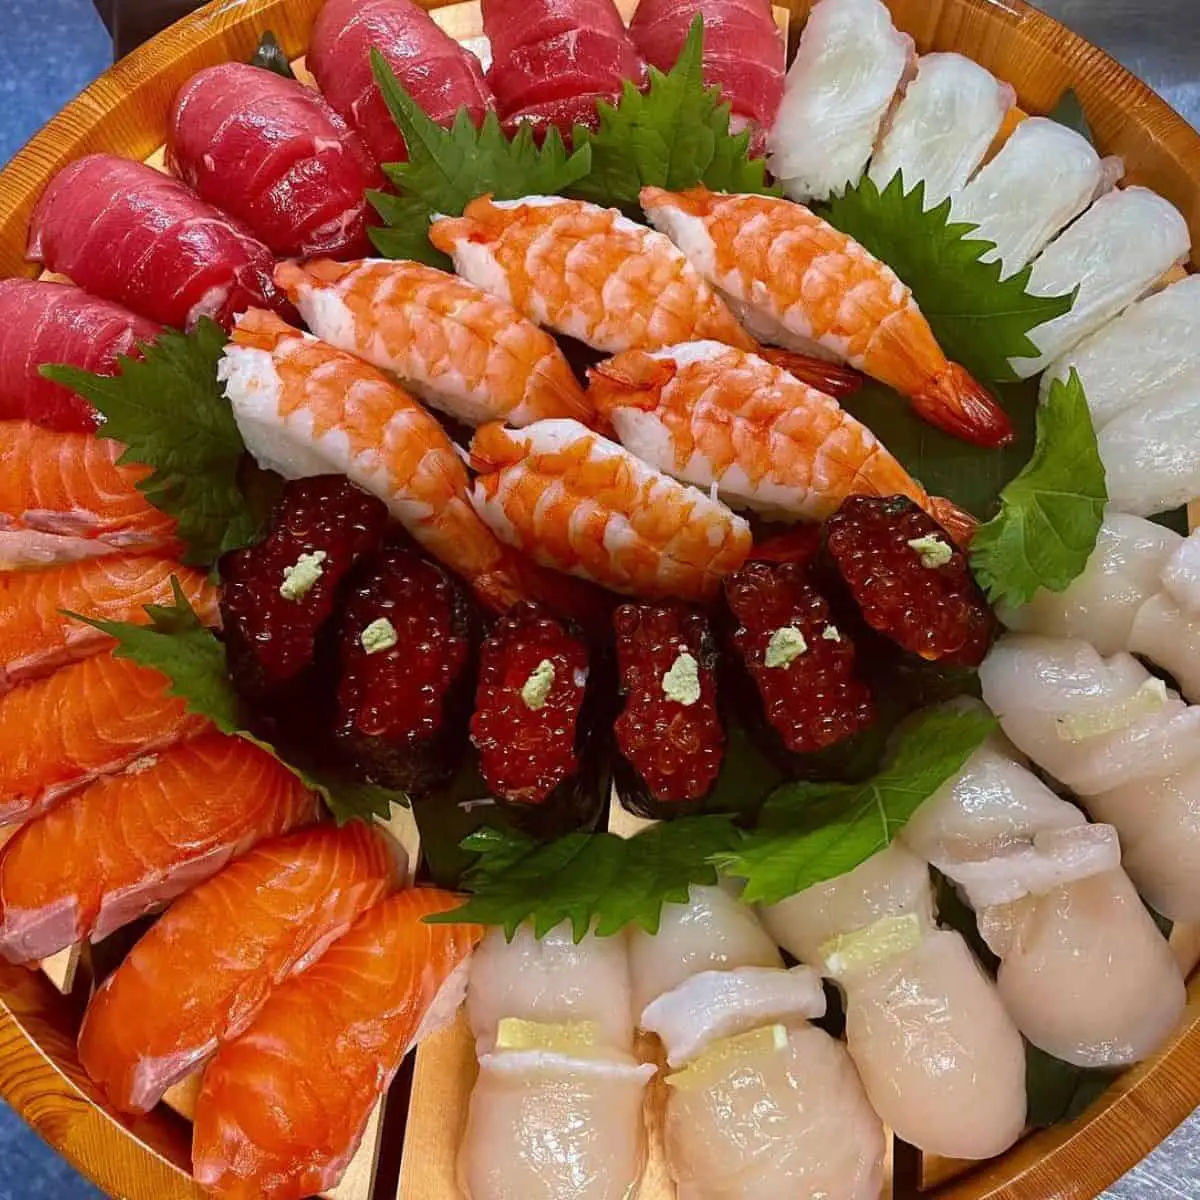 Colourful and delicious seafood meals of Ezo Seafood